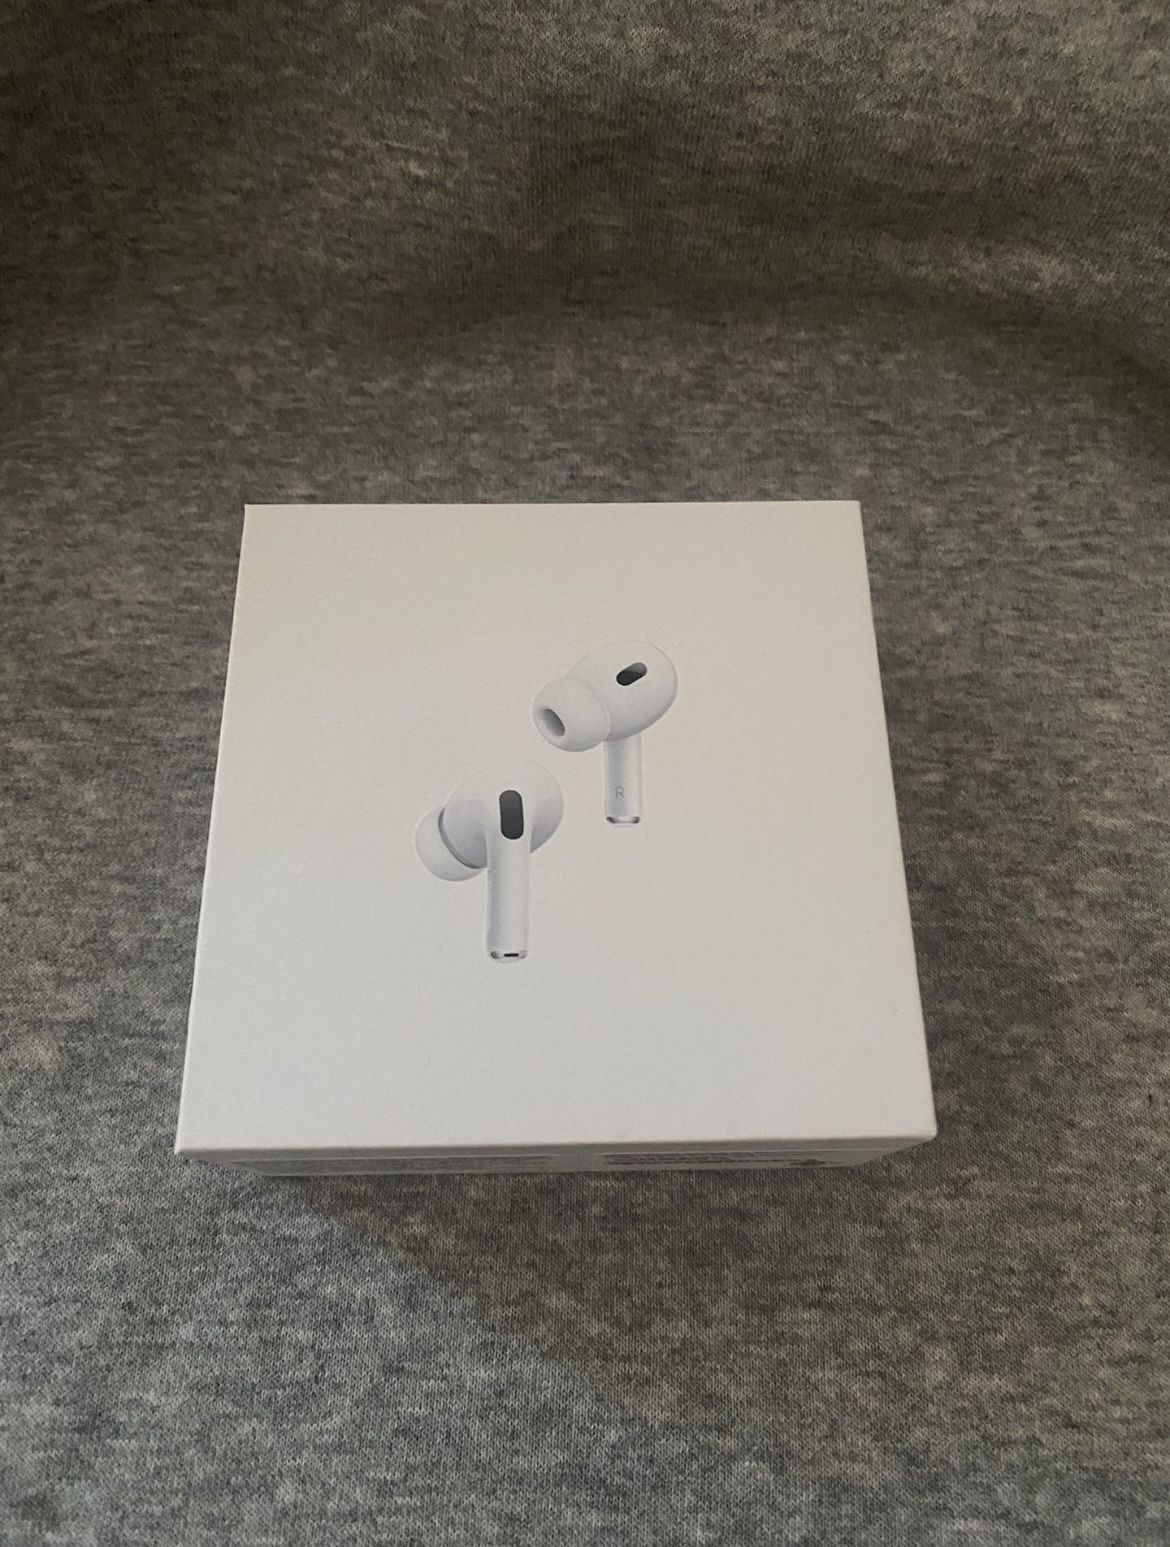 Airpod Pros Unused and Sealed(gen 2)